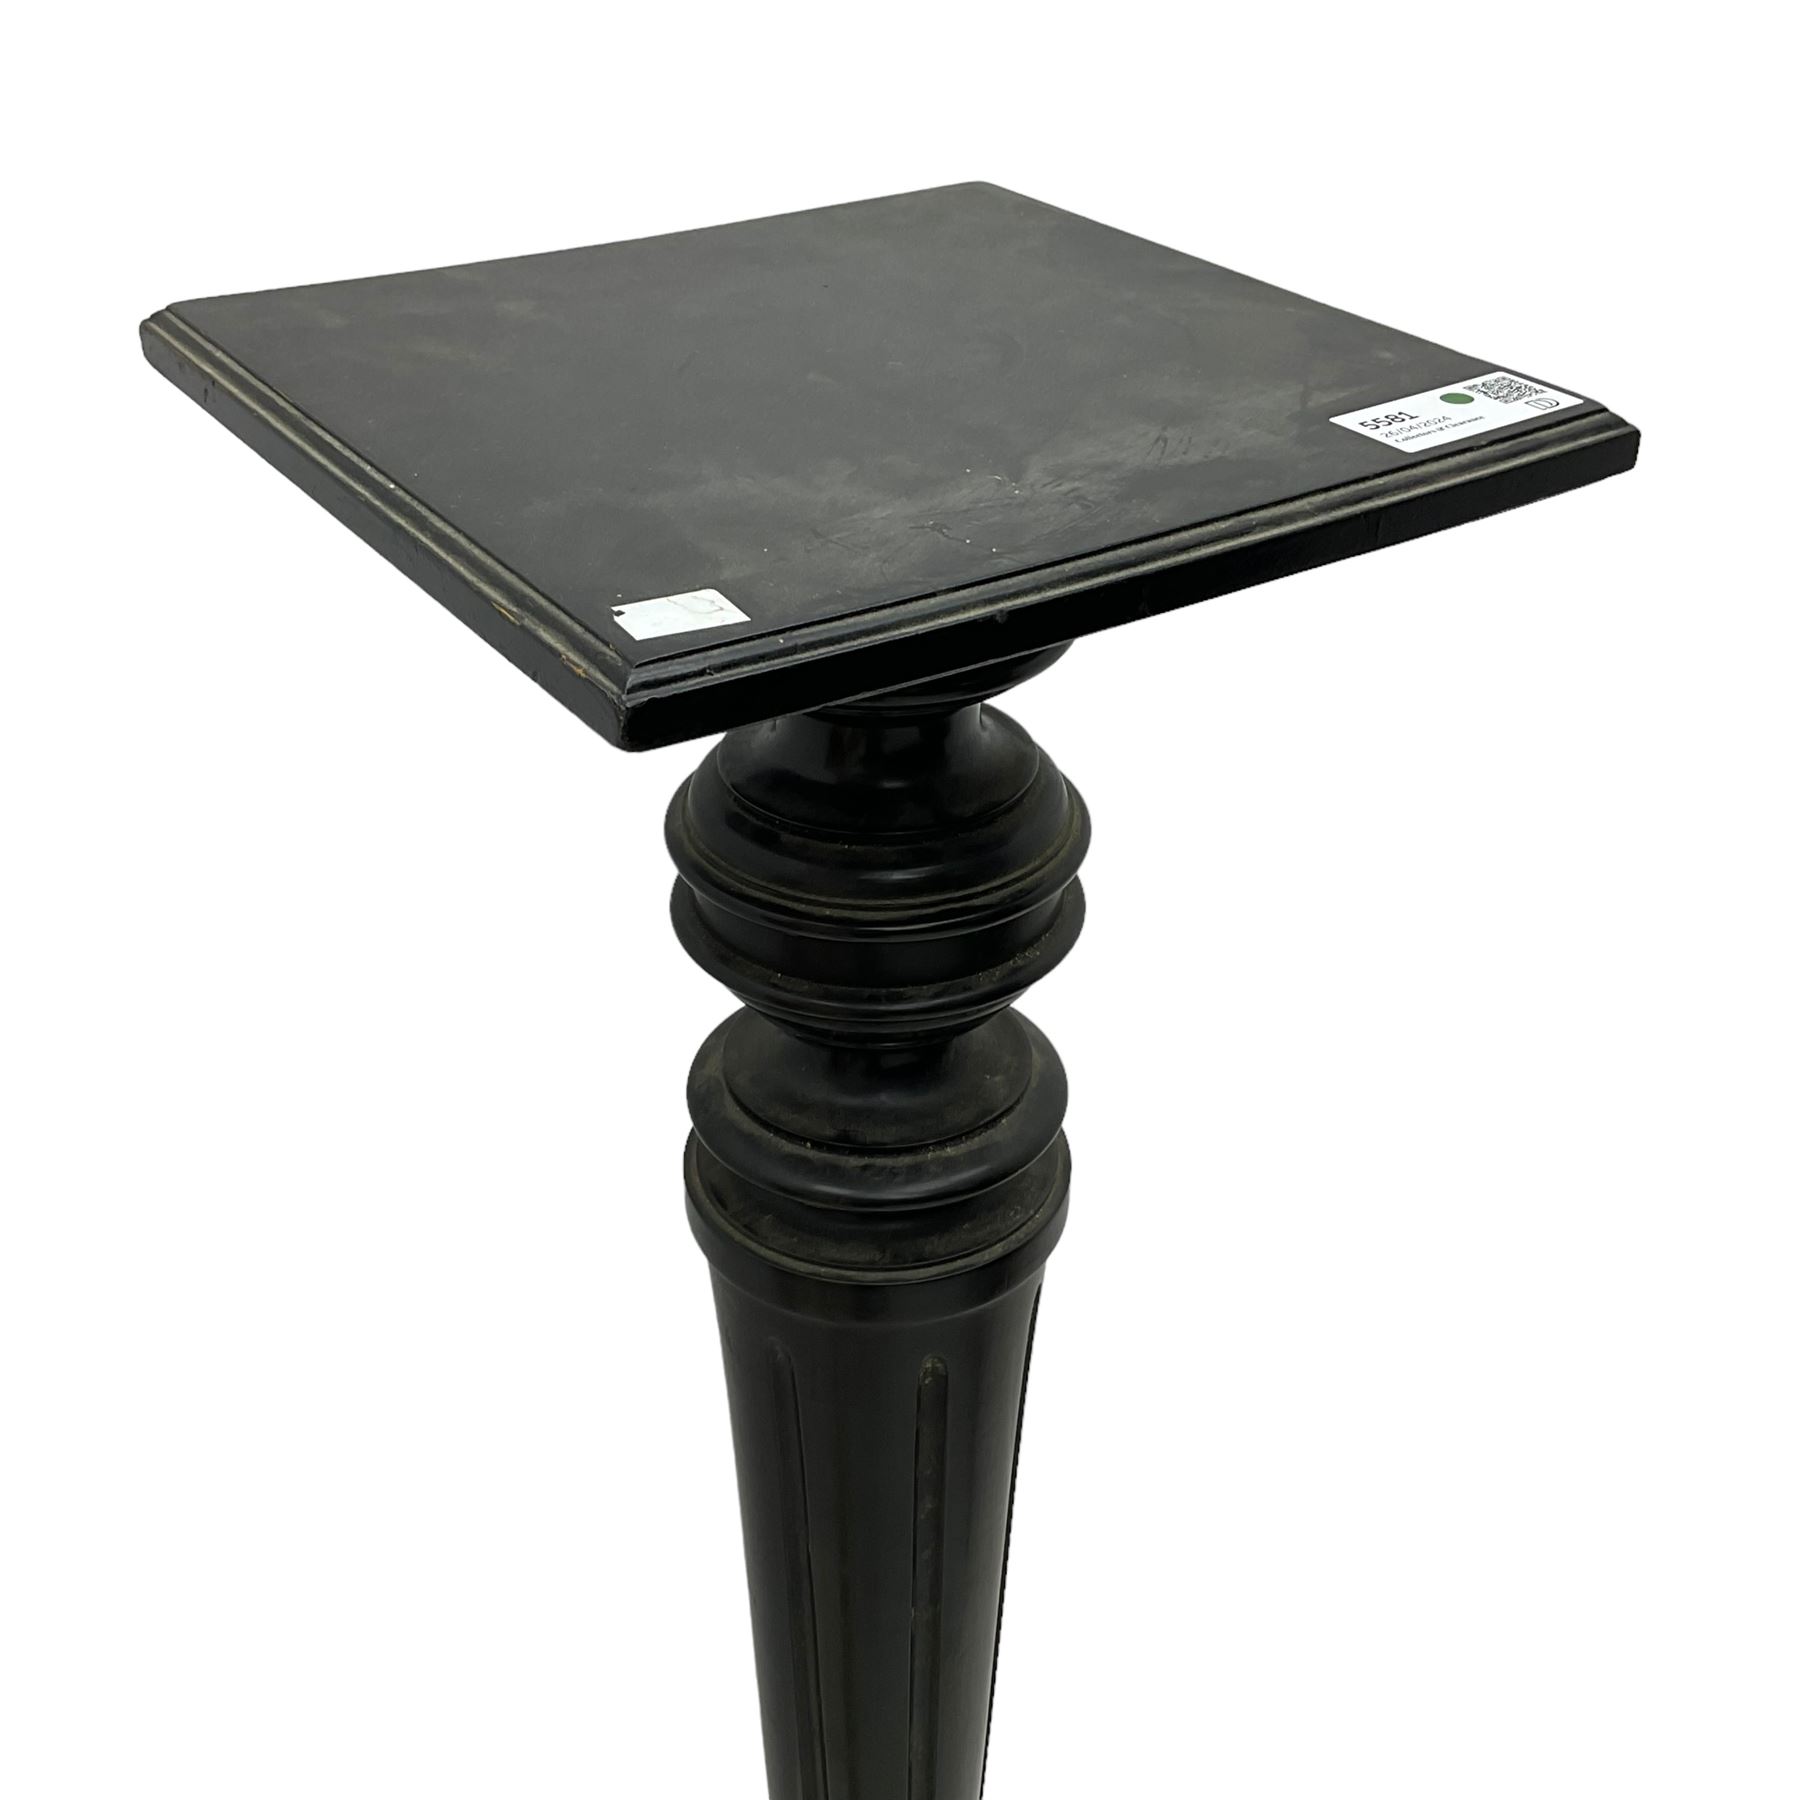 Late Victorian ebonised torchère or plant stand - Image 2 of 5